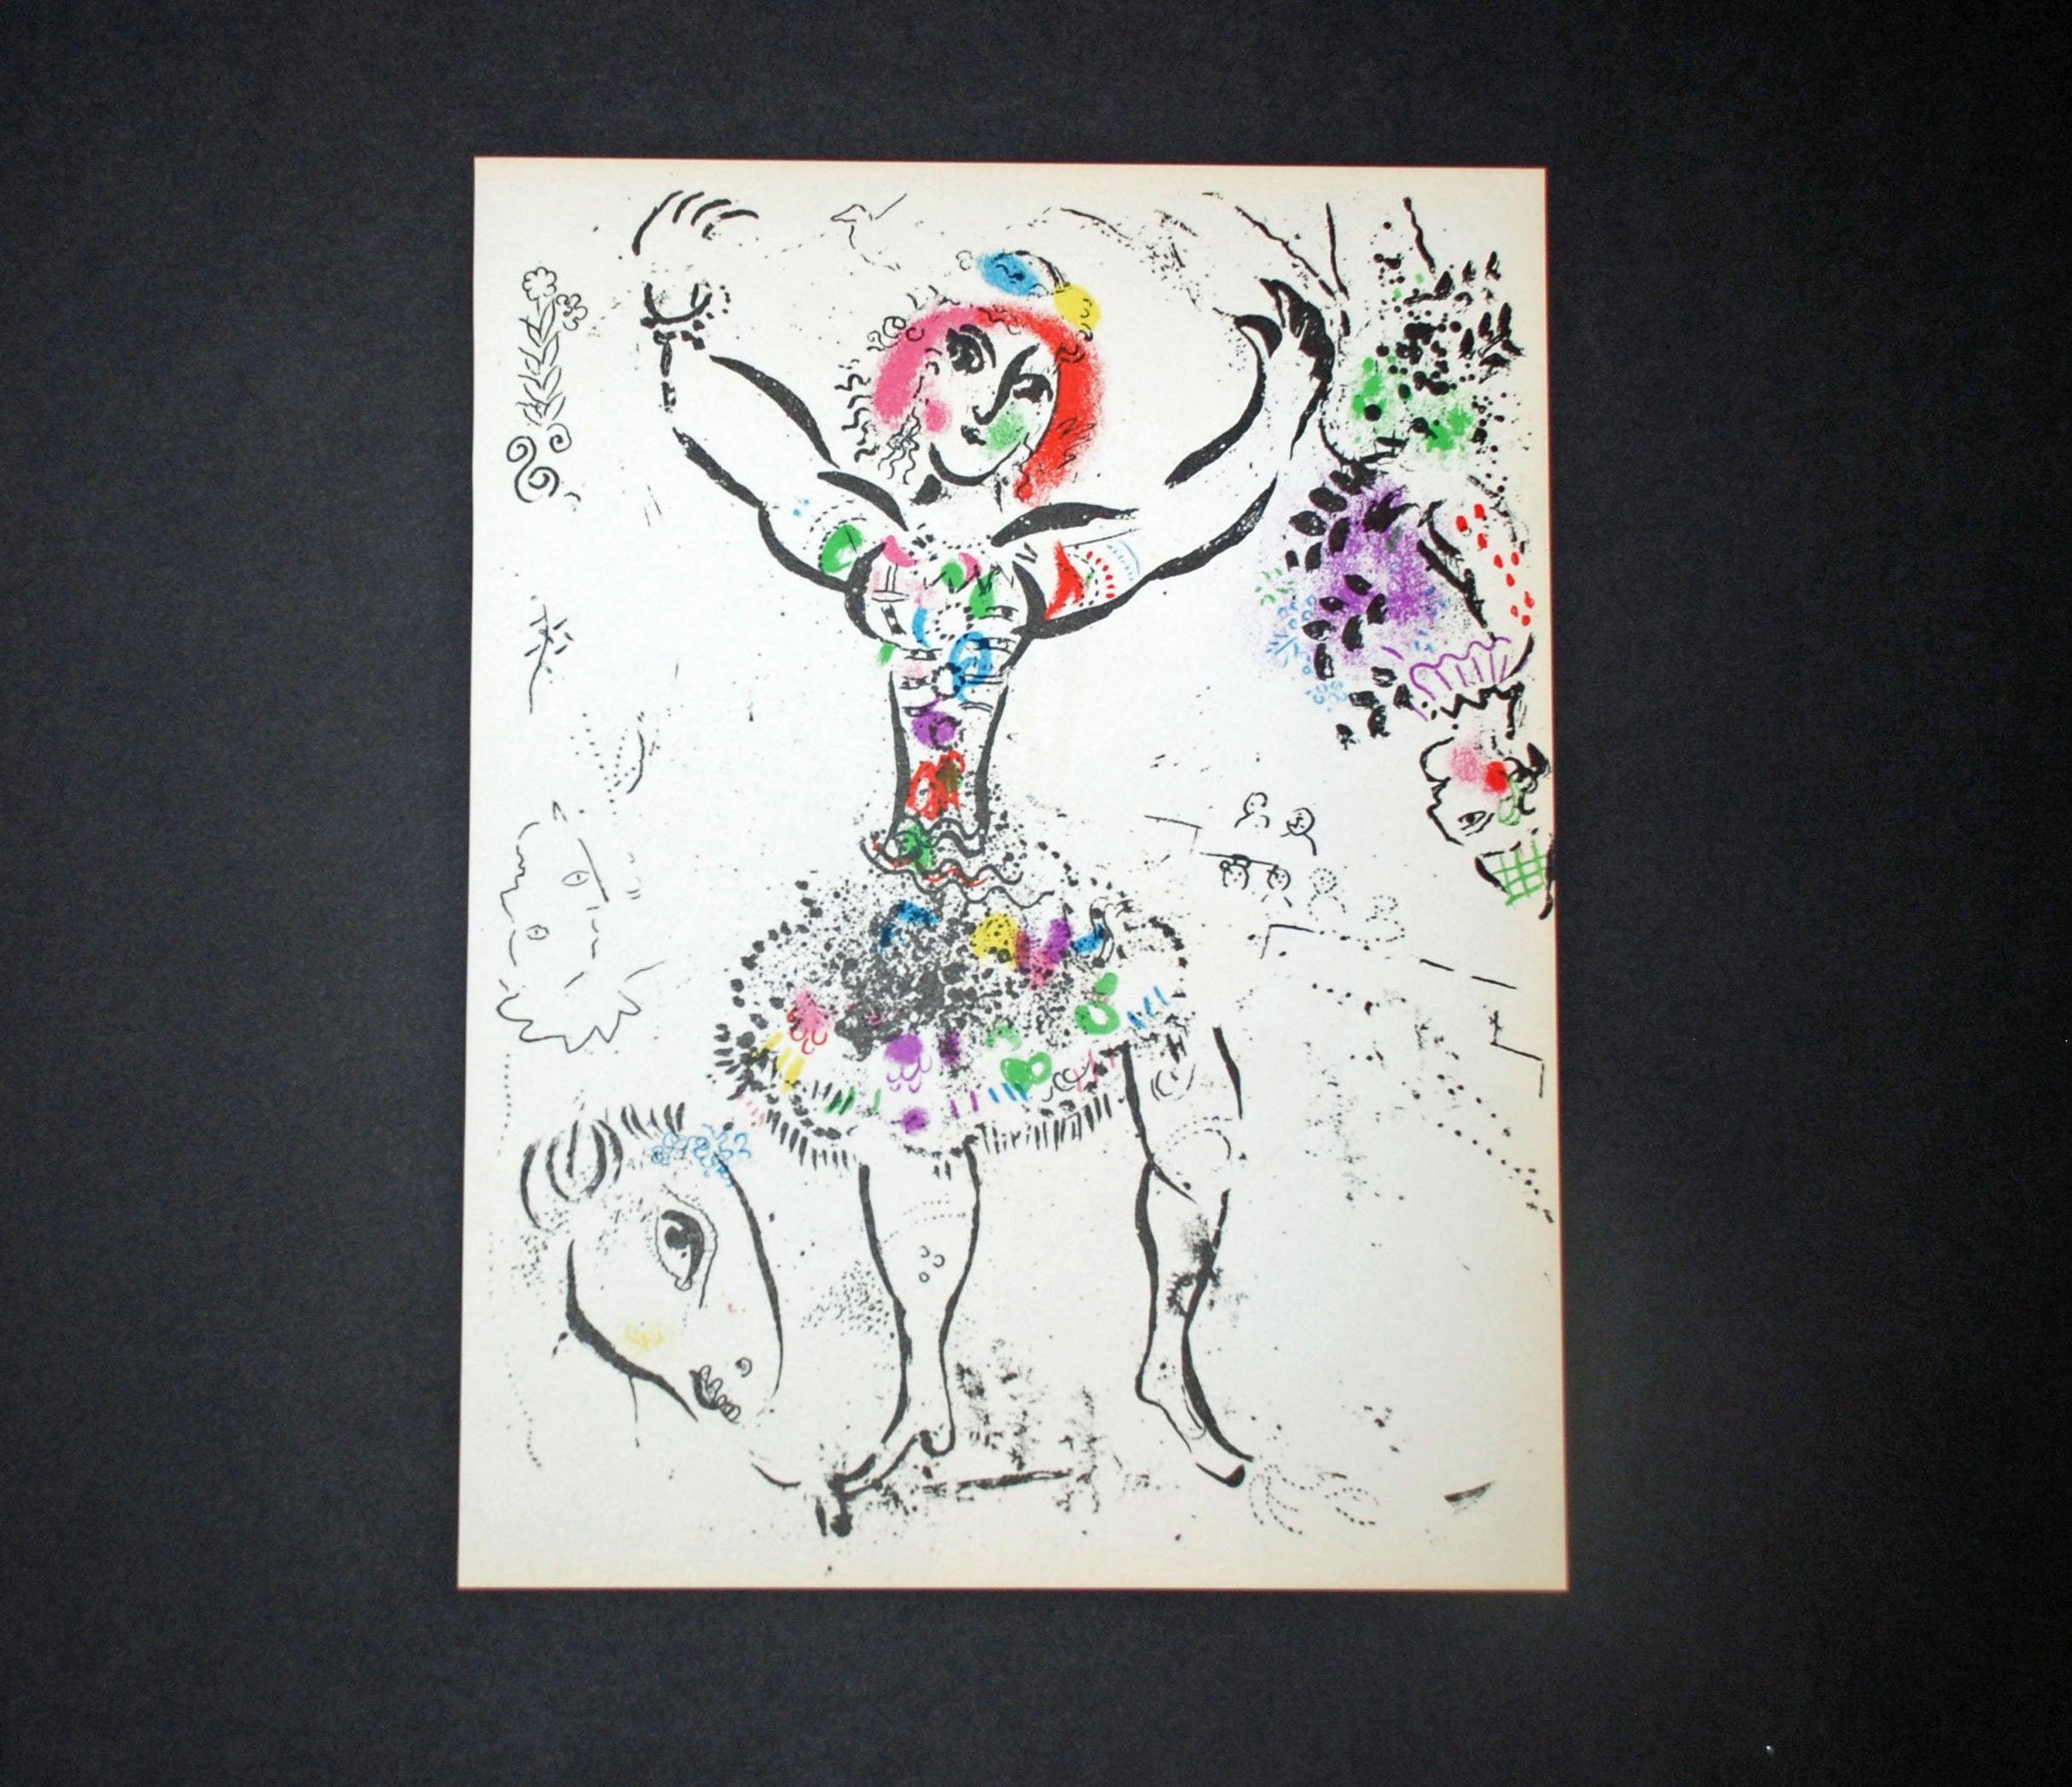 Woman Juggler, from 1960 Mourlot Lithographe I - Modern Print by Marc Chagall